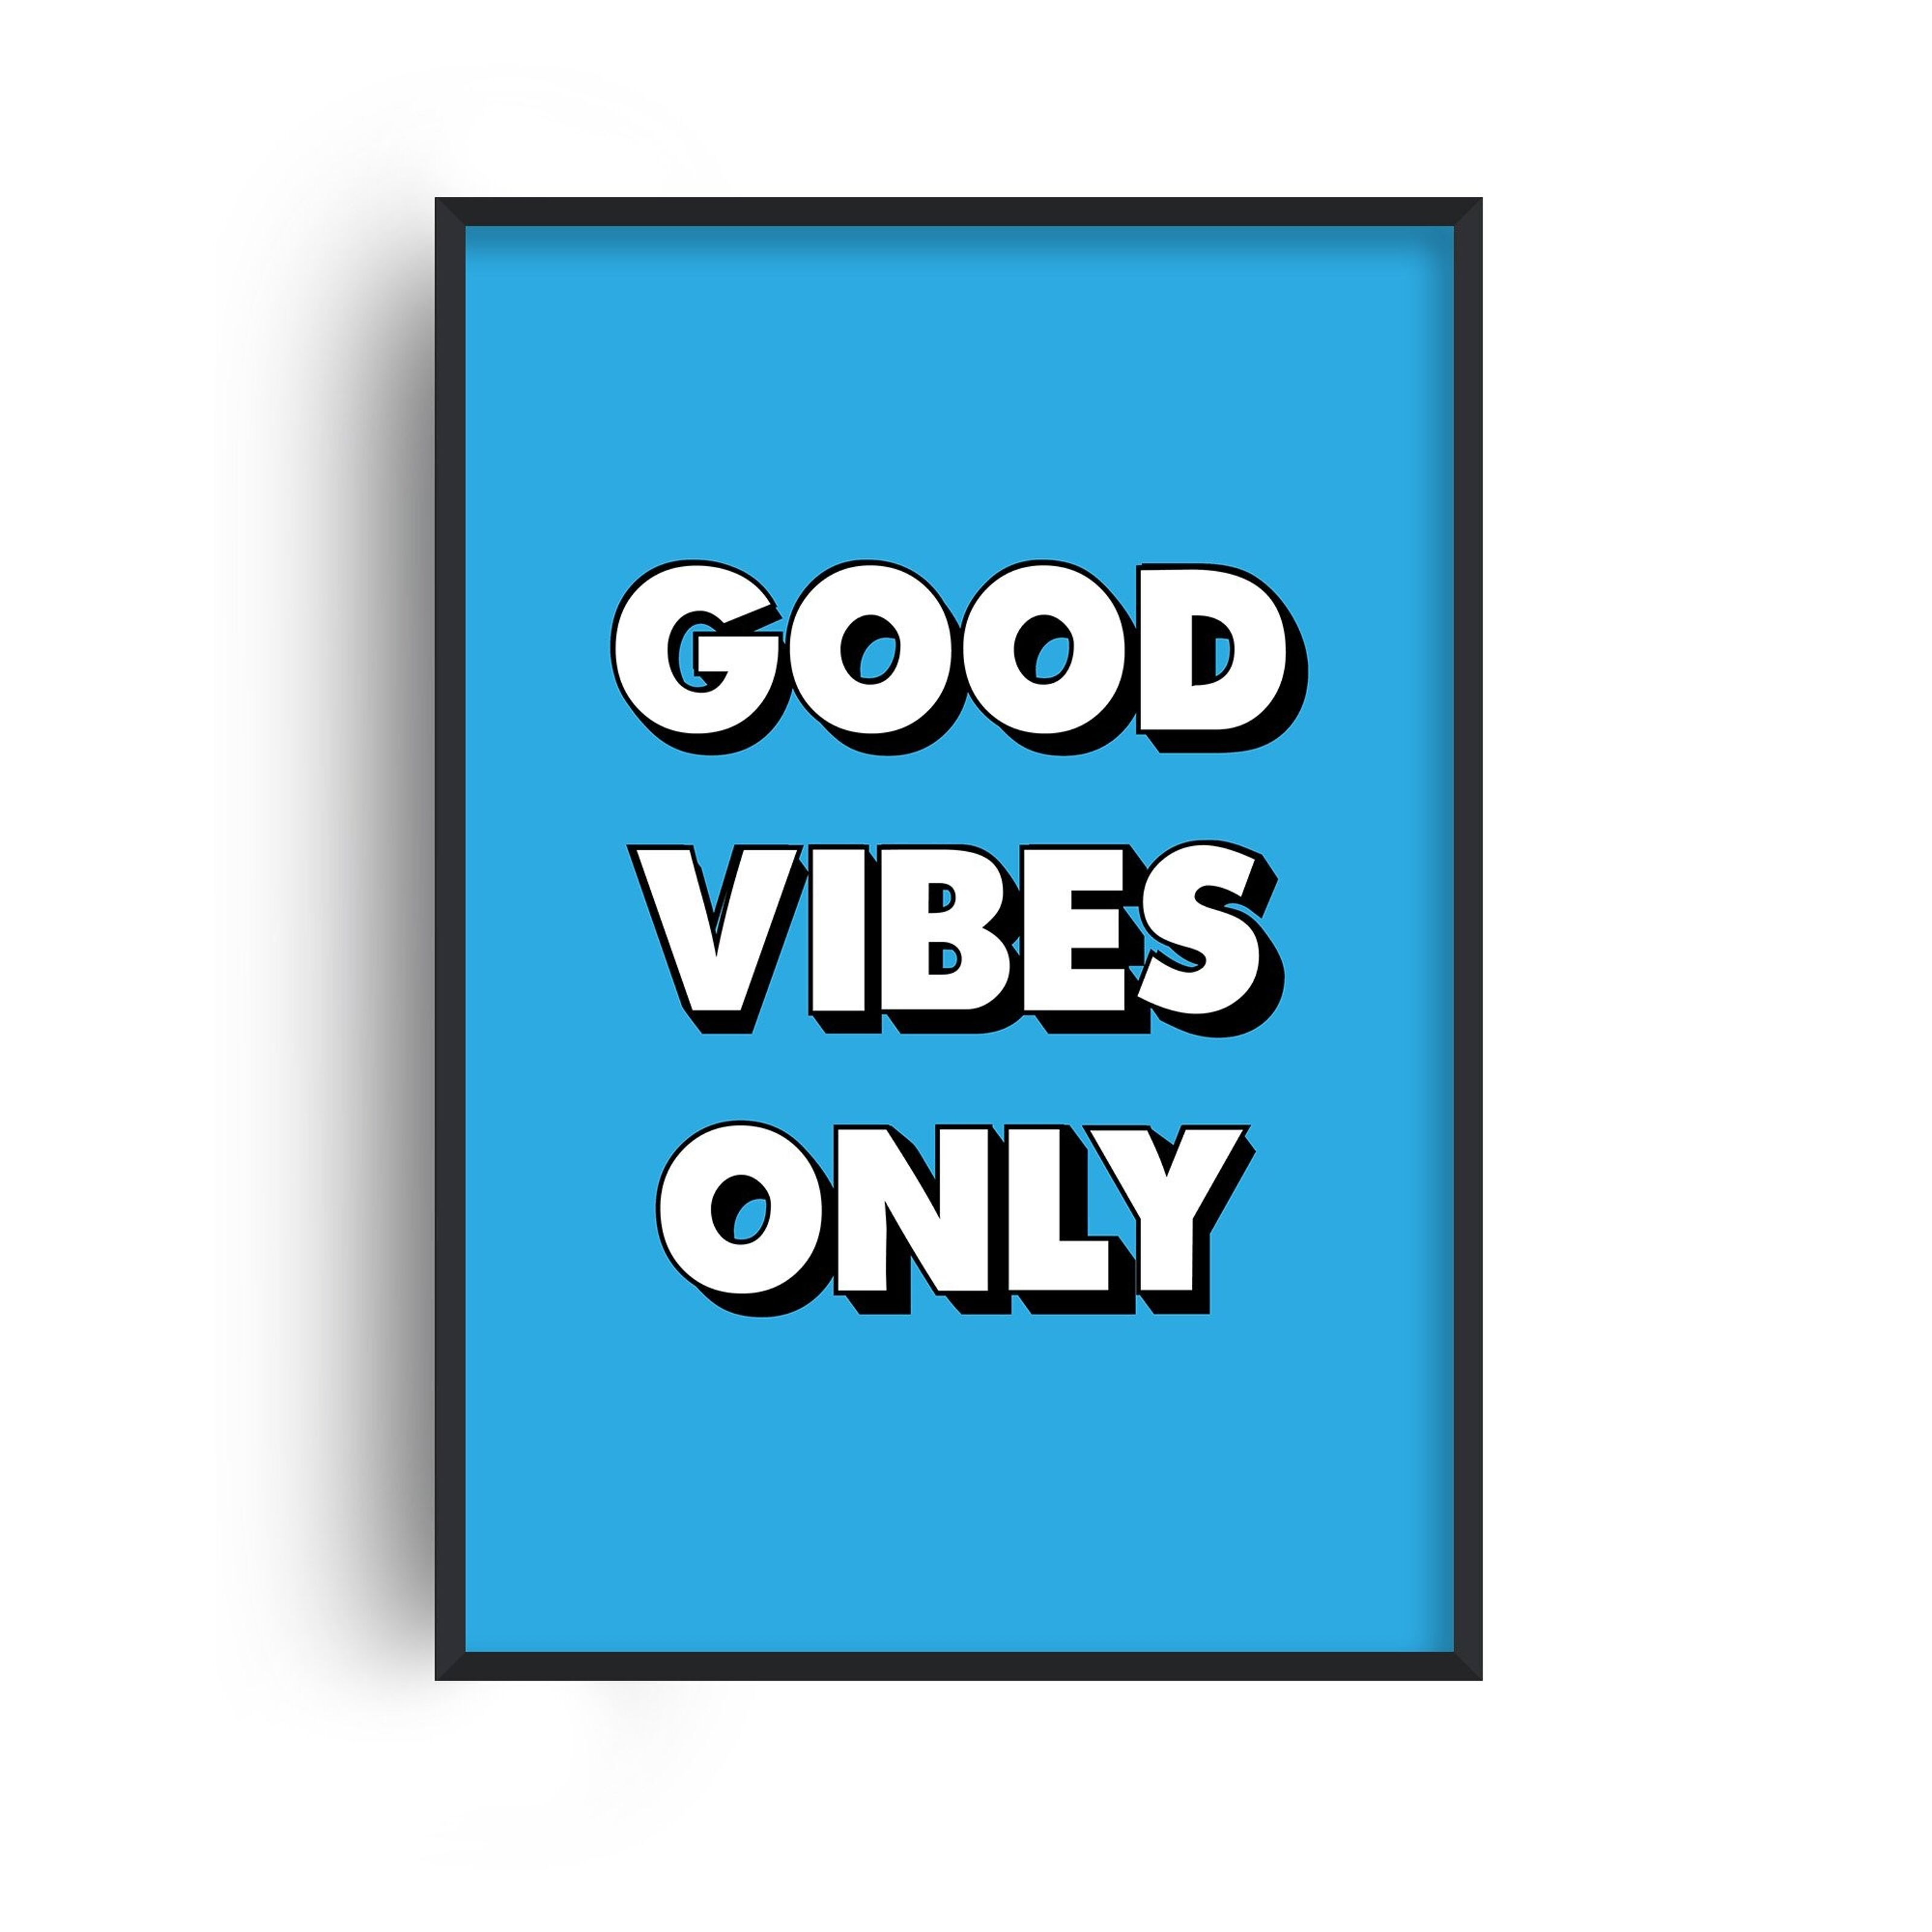 Good Vibes Only Stock Photos and Pictures - 7,120 Images